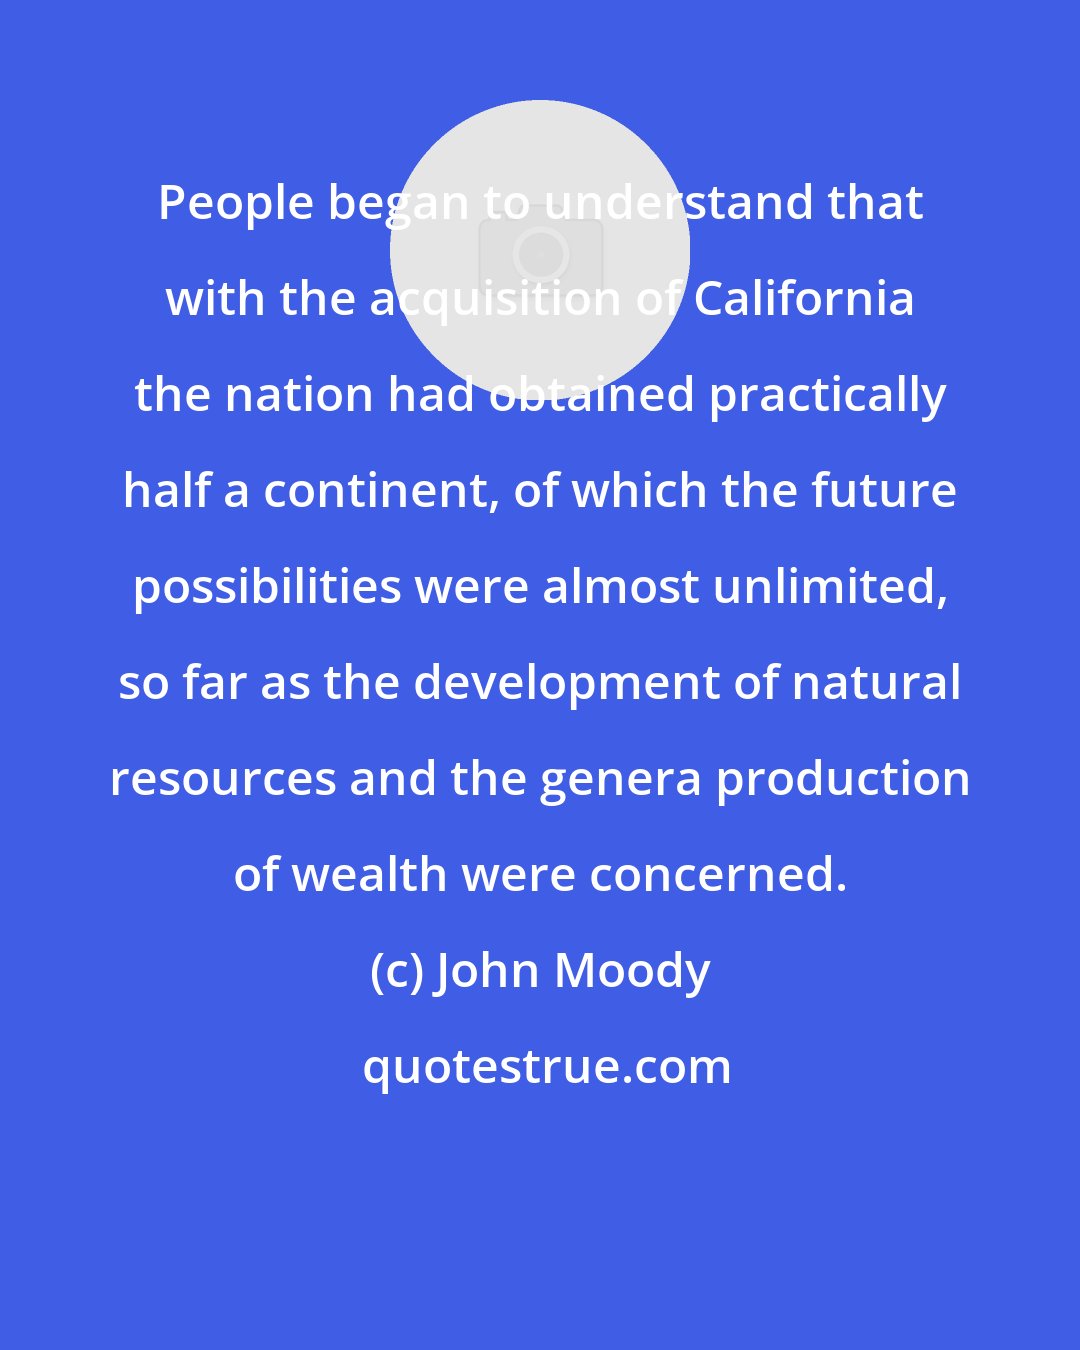 John Moody: People began to understand that with the acquisition of California the nation had obtained practically half a continent, of which the future possibilities were almost unlimited, so far as the development of natural resources and the genera production of wealth were concerned.